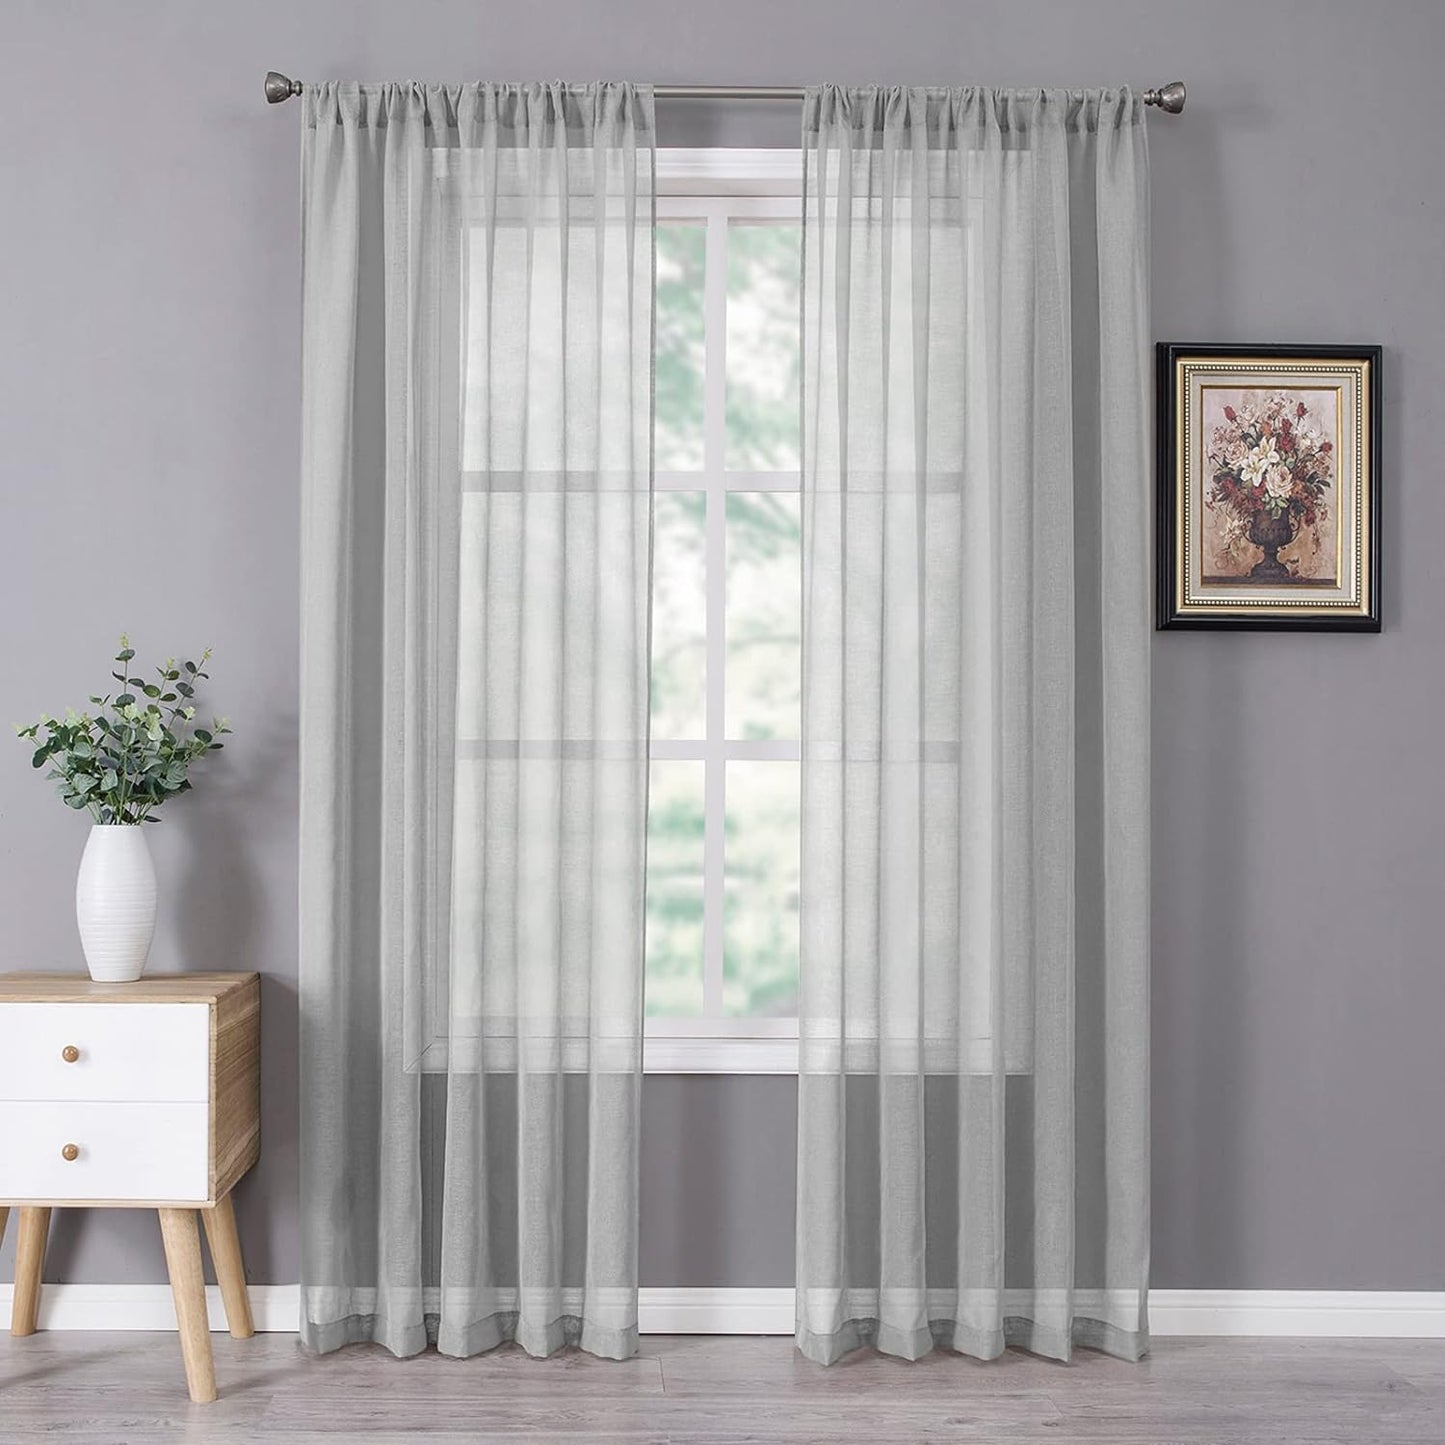 Tollpiz Short Sheer Curtains Linen Textured Bedroom Curtain Sheers Light Filtering Rod Pocket Voile Curtains for Living Room, 54 X 45 Inches Long, White, Set of 2 Panels  Tollpiz Tex Silver Grey 54"W X 72"L 